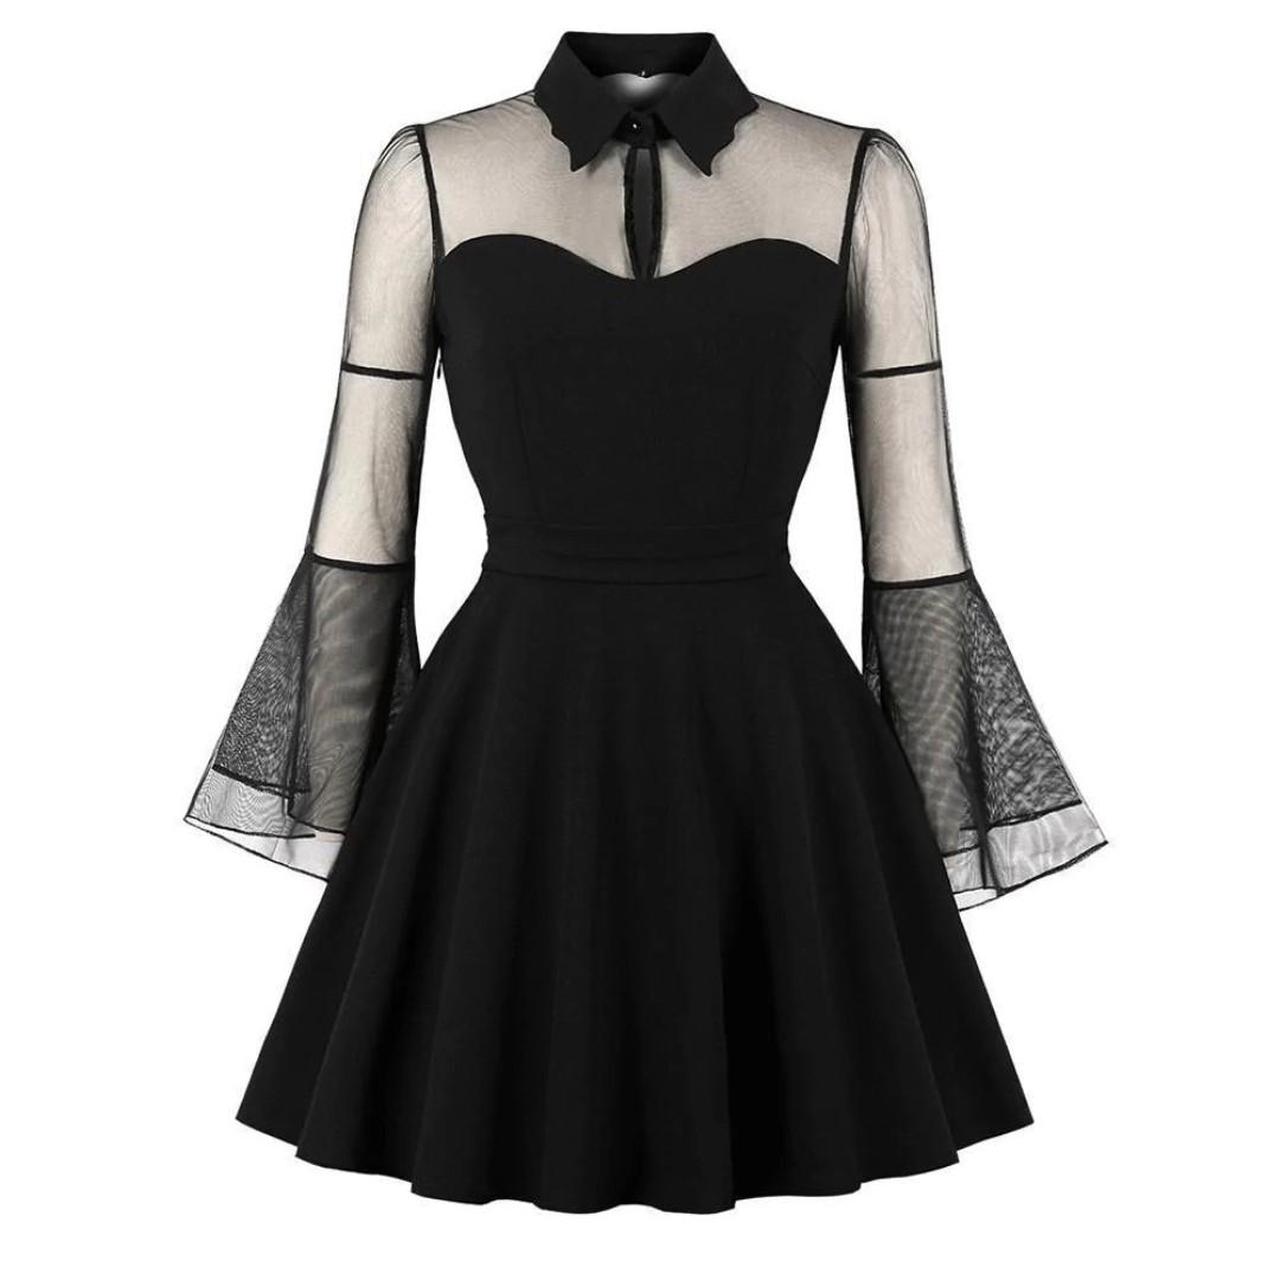 Gothic dress with mesh bust and sleeves 35.4